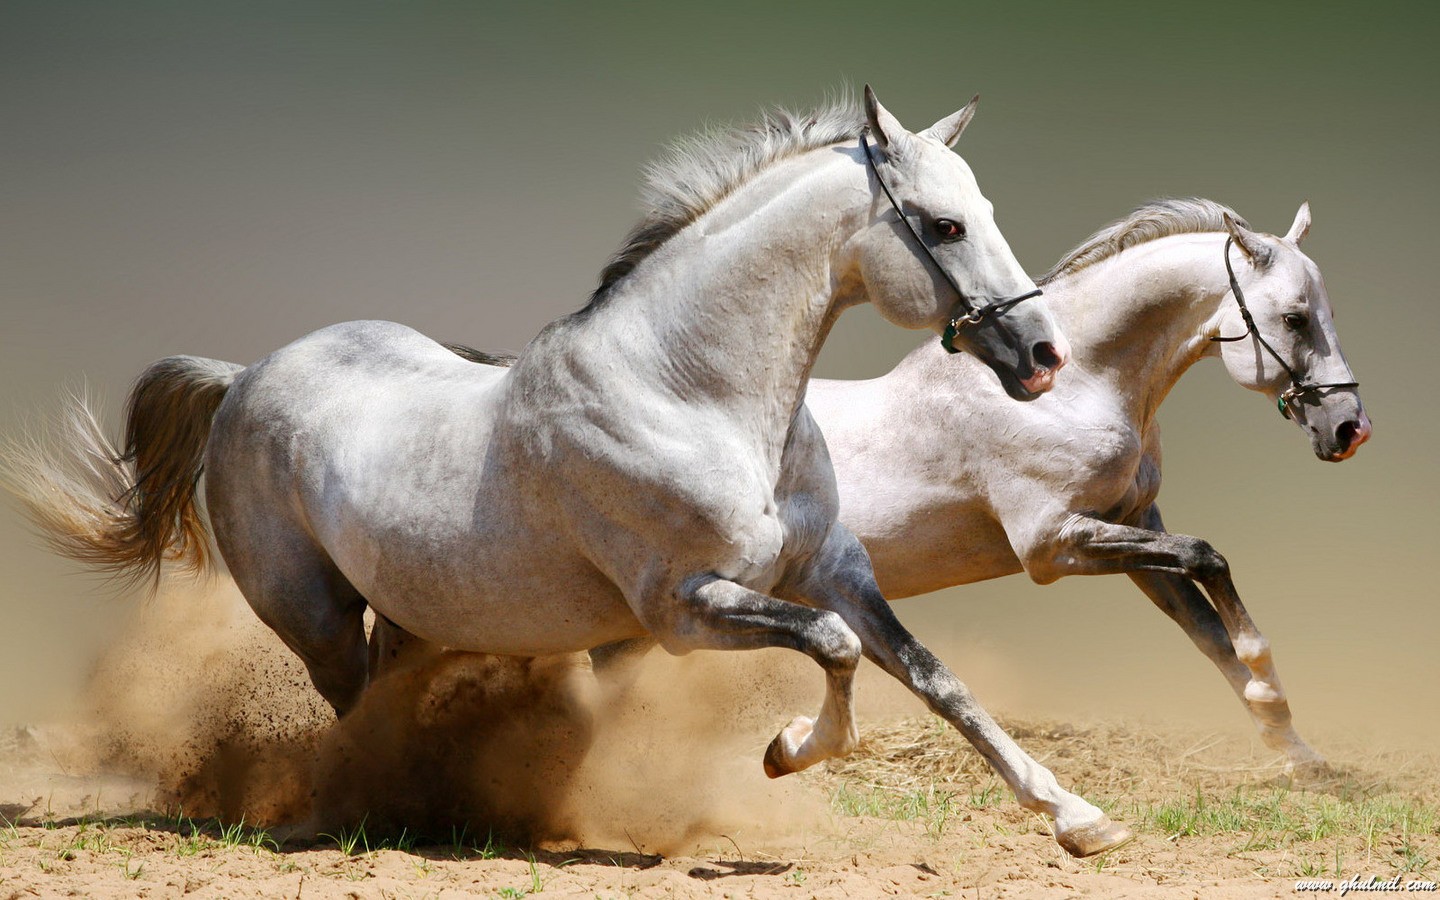 Wild Horses HD Wallpapers Wild Horses HD Wallpapers Check out the 1440x900